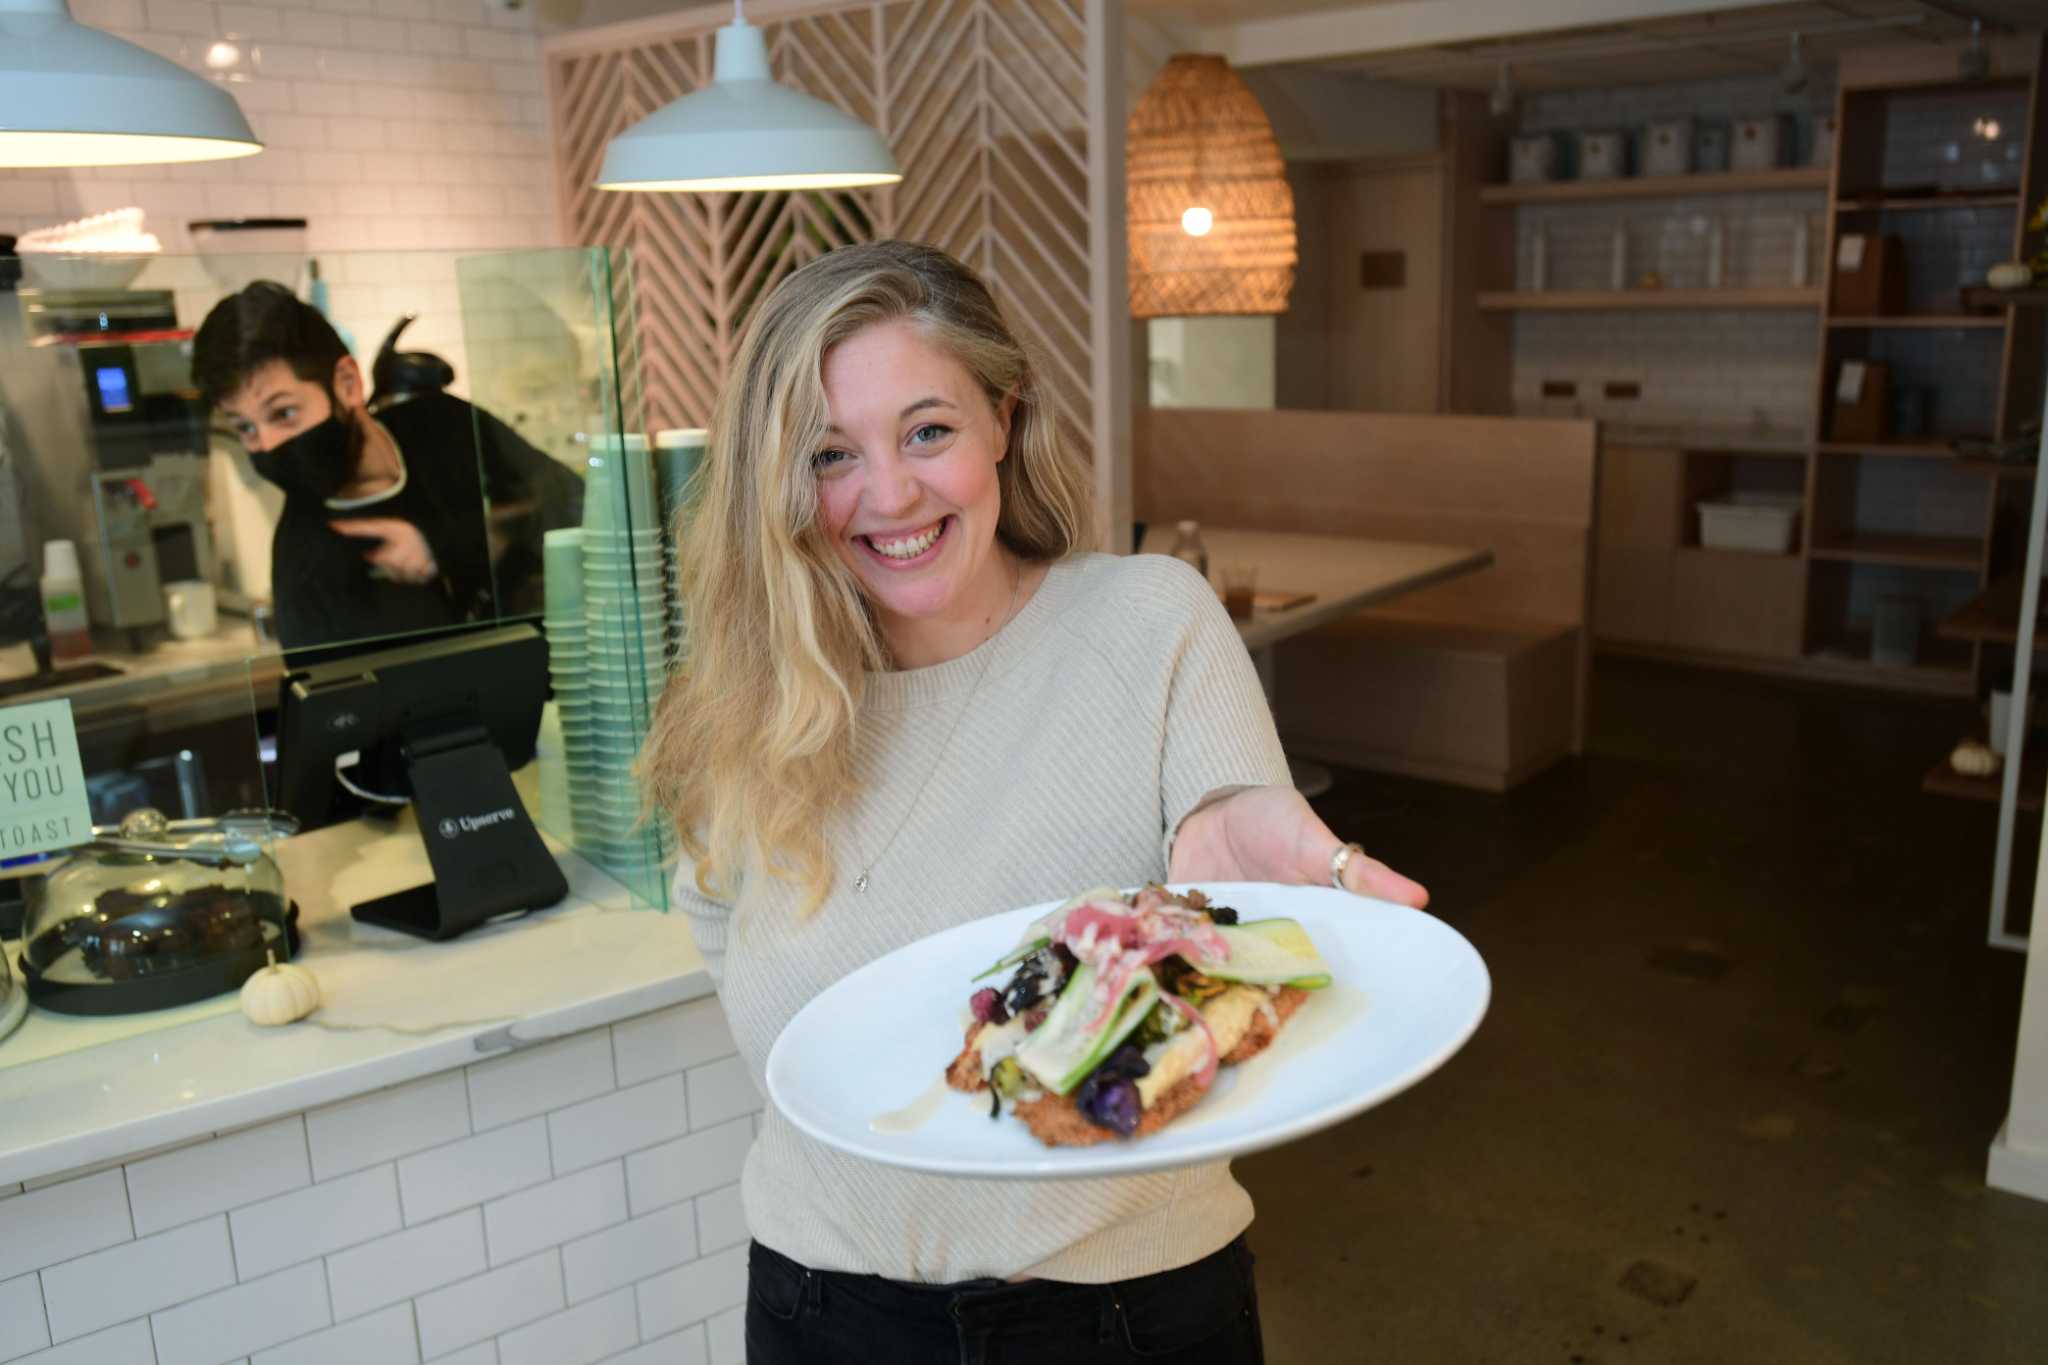 ‘I’m obsessed’: Manna Toast in Westport offers fresh, healthy sandwiches